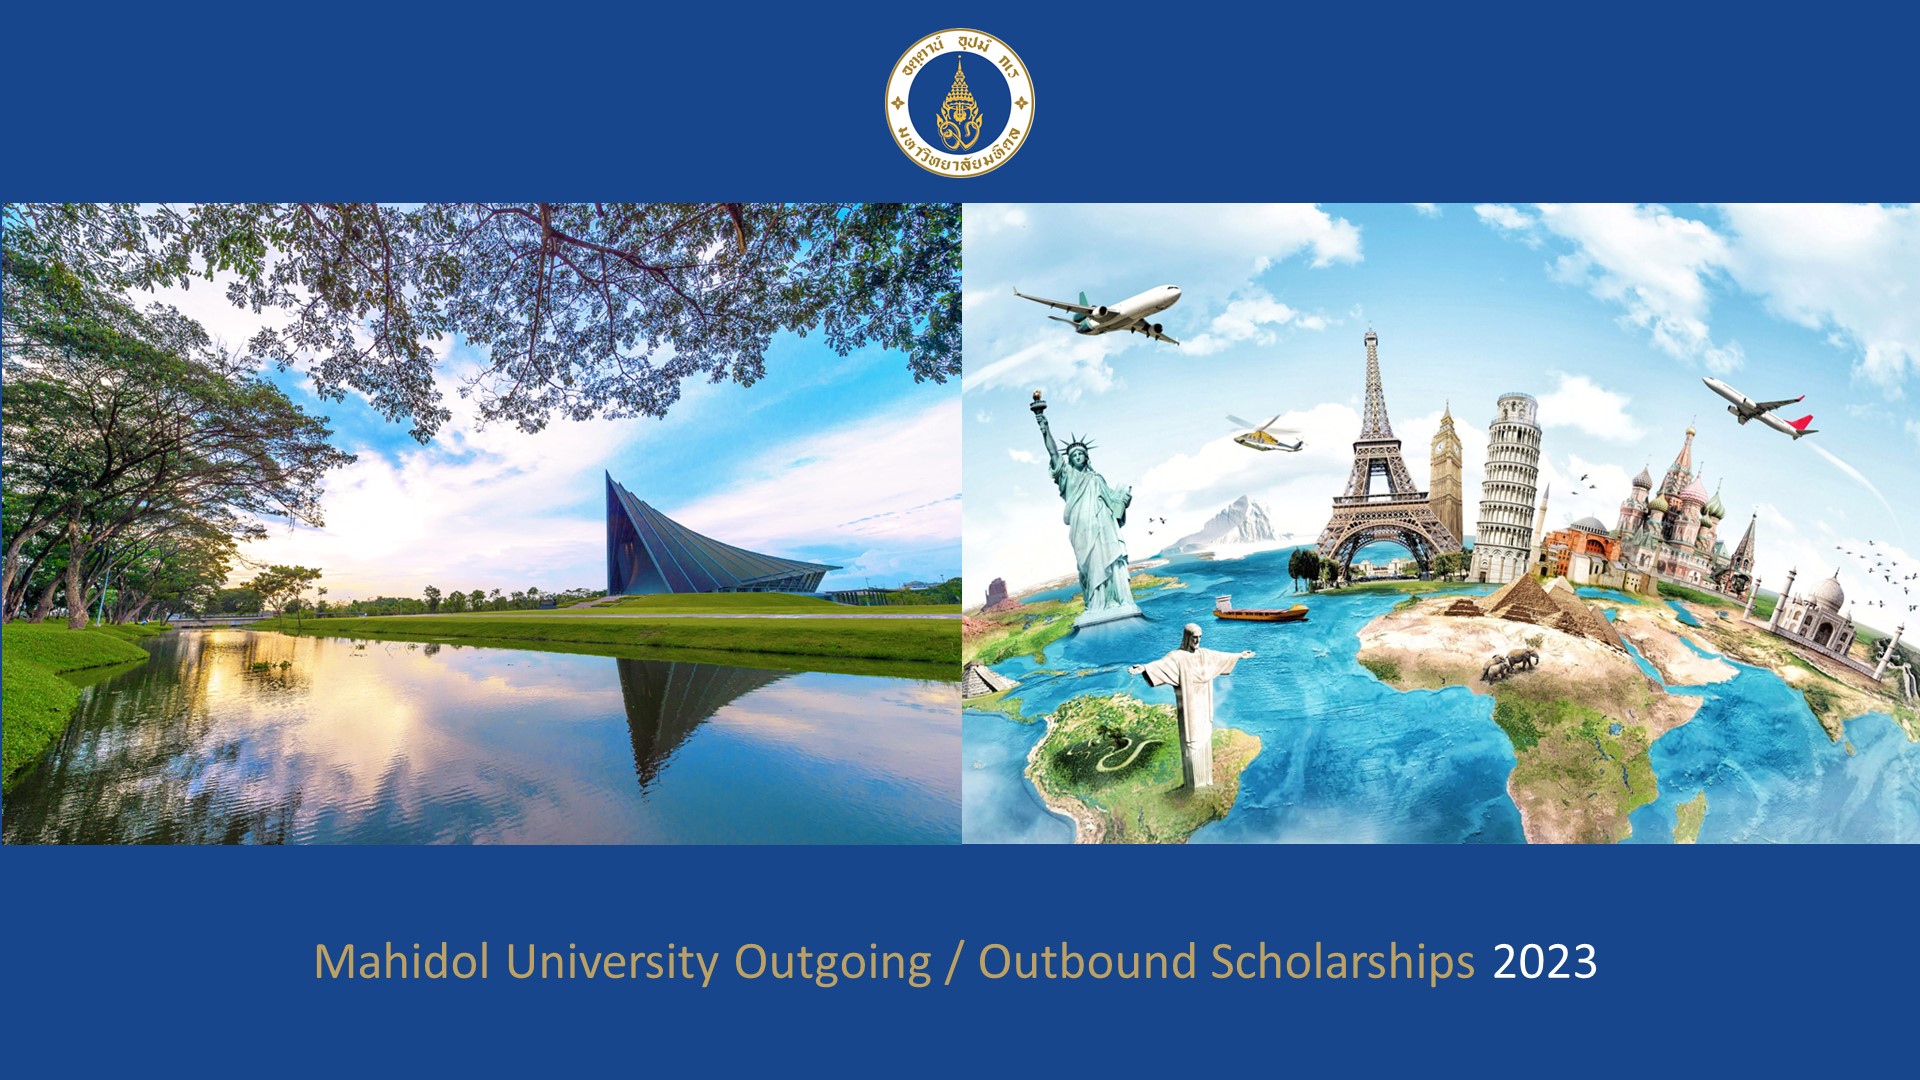 Mahidol University Outgoing / Outbound Scholarships 2023